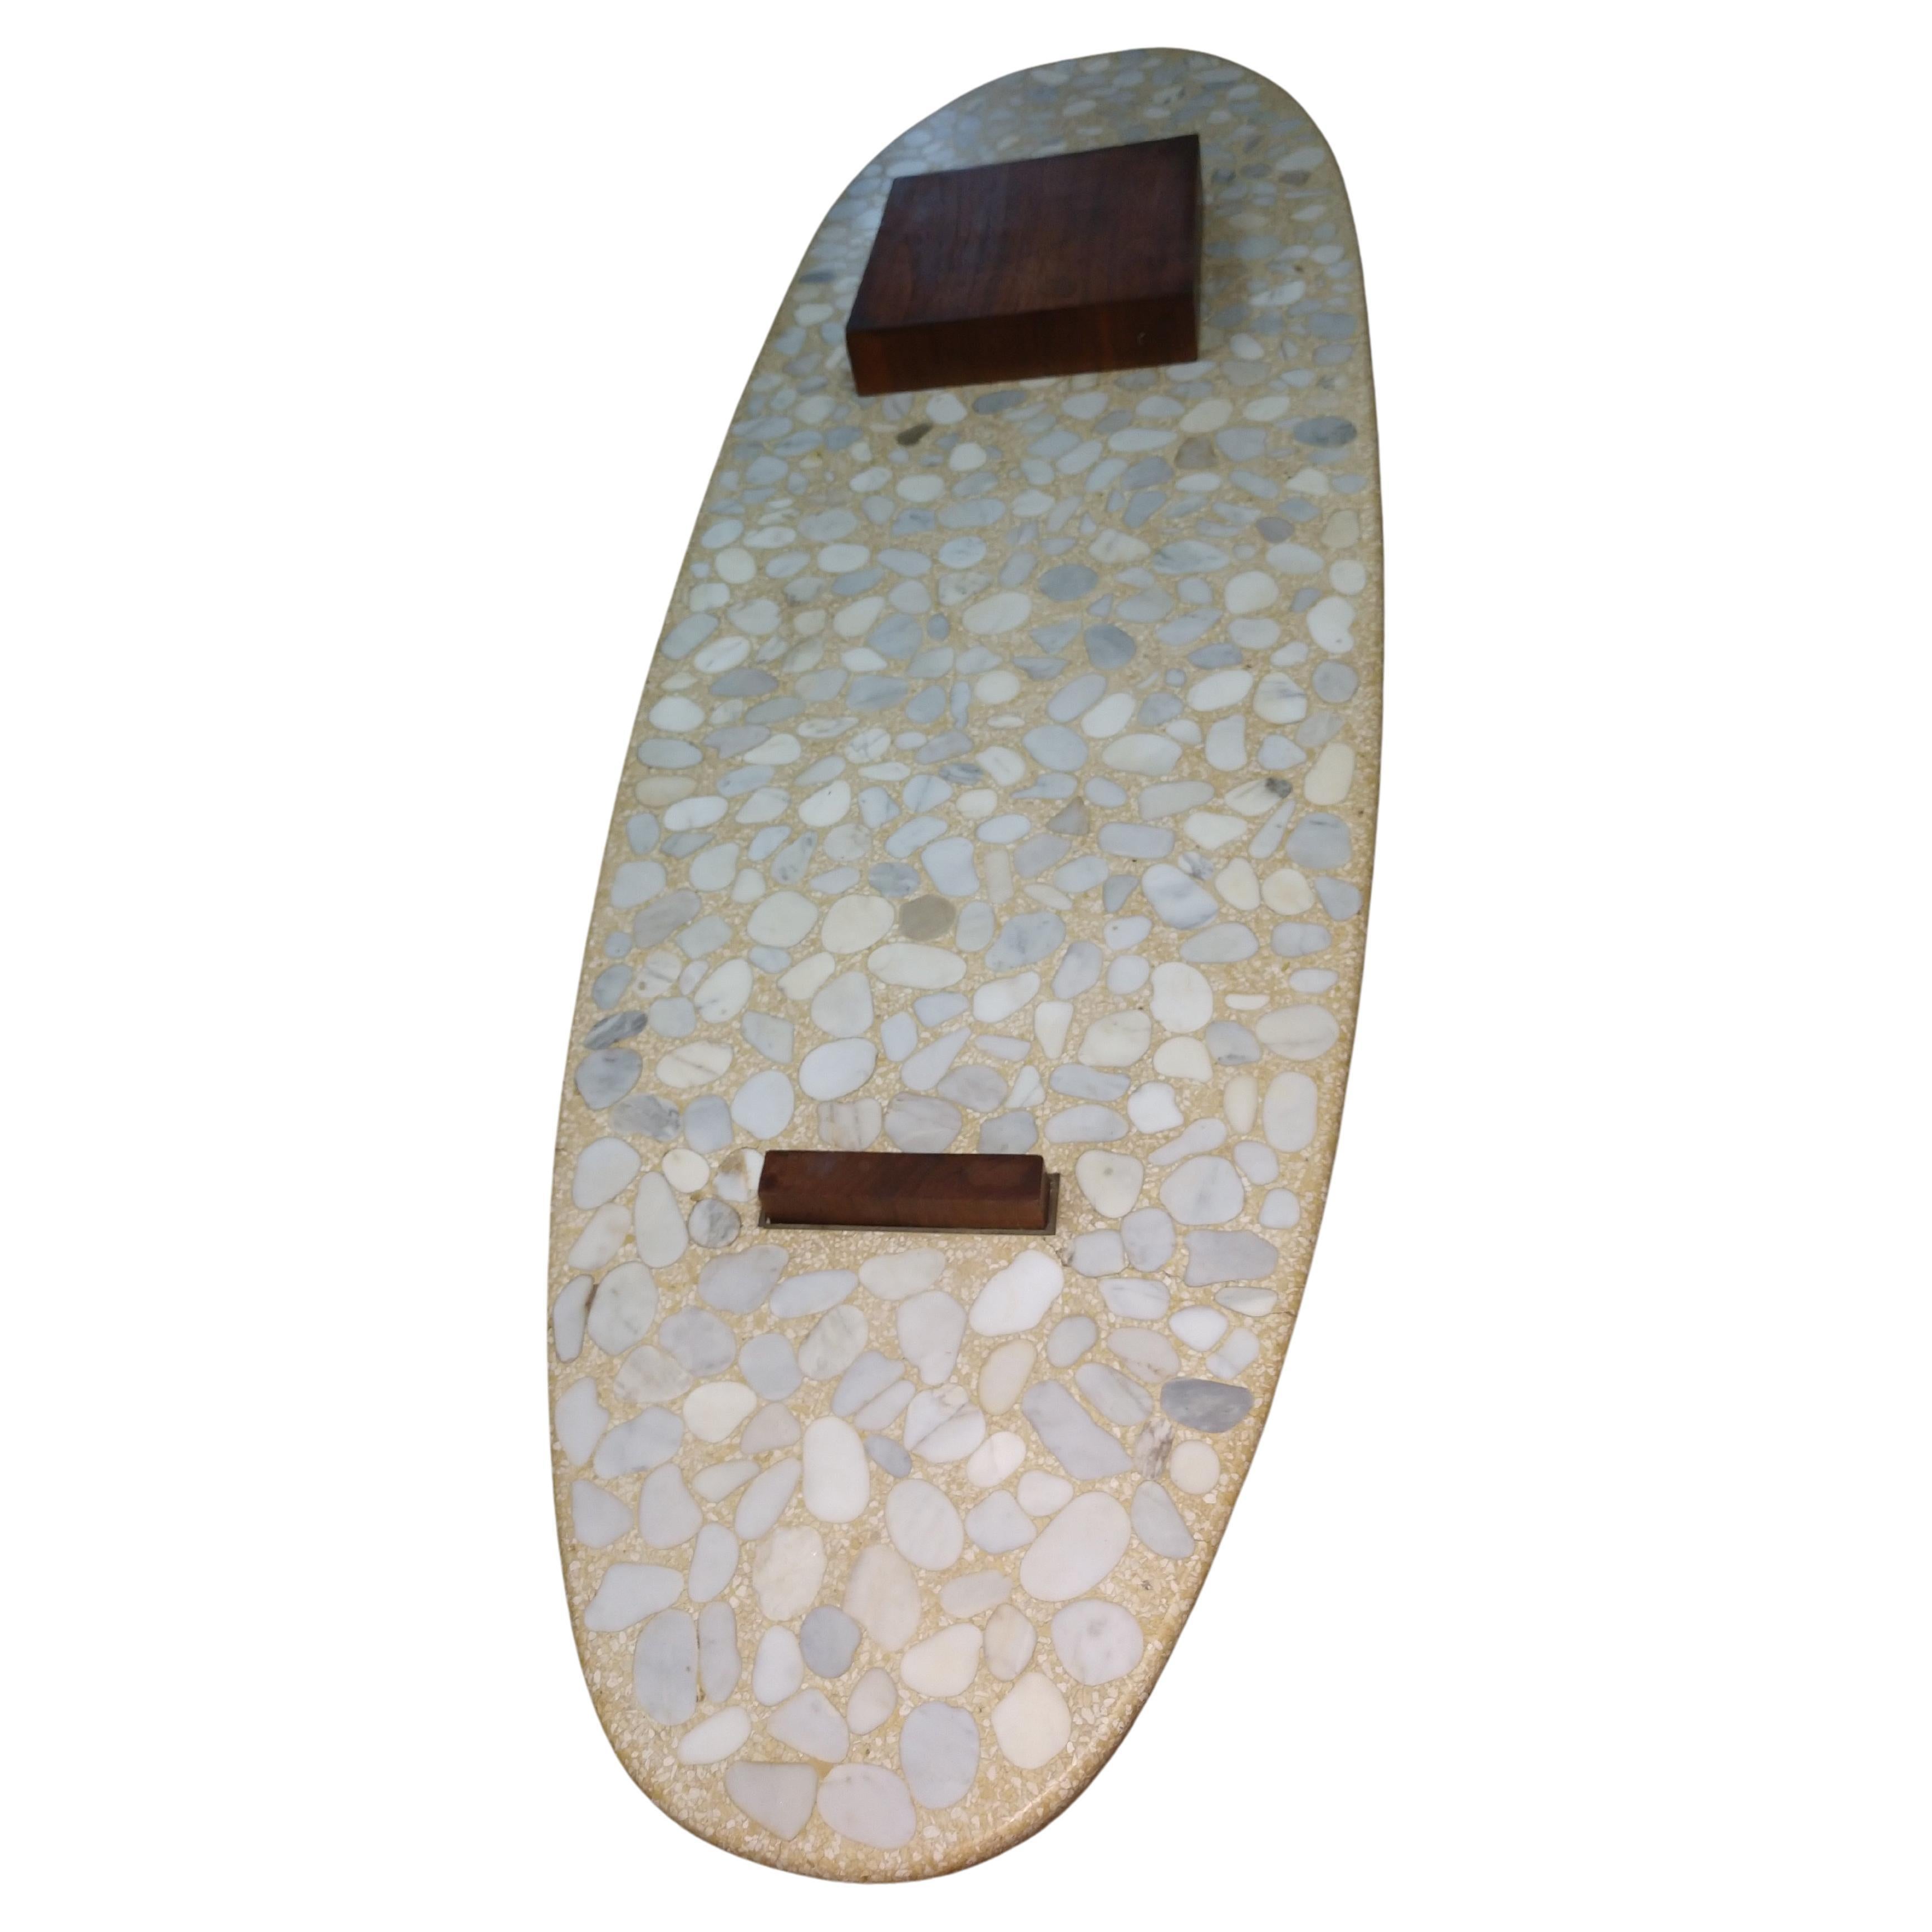 Fabulous Terrazzo table with walnut blocks pierced through. Surfboard shaped table is 1.5 inches thick.  In excellent vintage condition with minimal wear. Top does have a few very minor non structural superficial cracks.